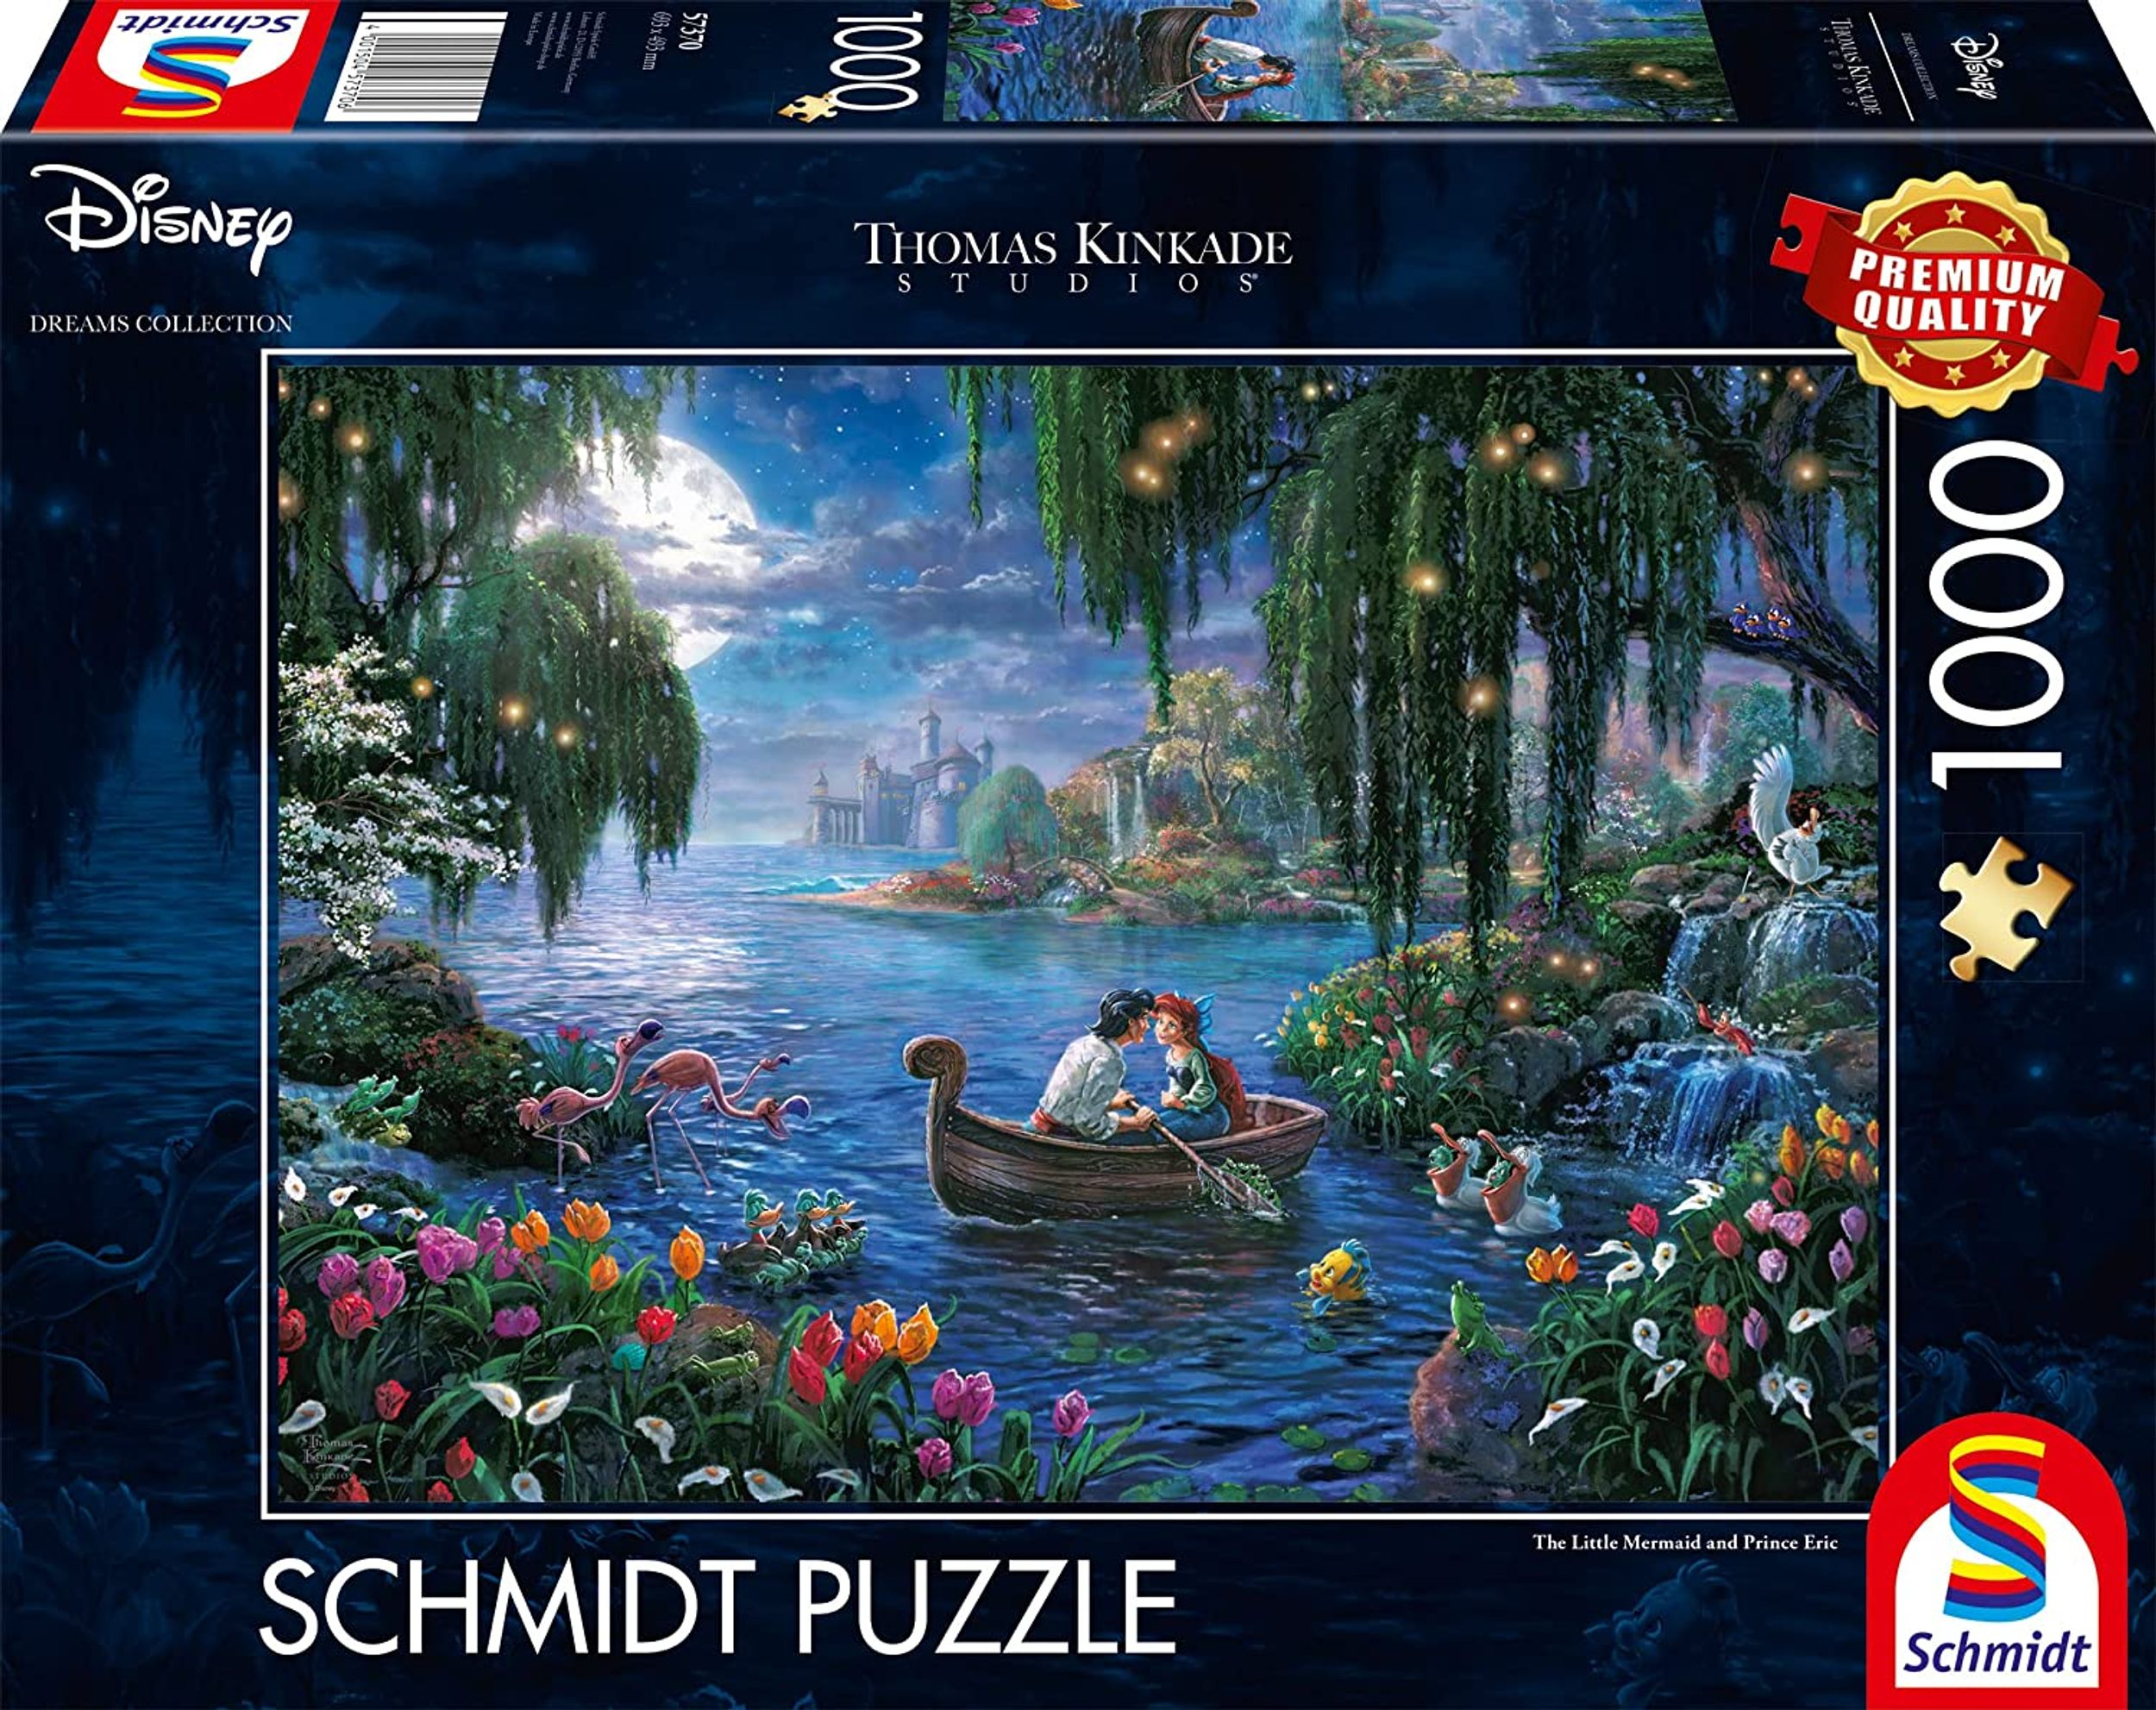 Puzzle Prince Mermaid SCHMIDT SPIELE The Eric and Little